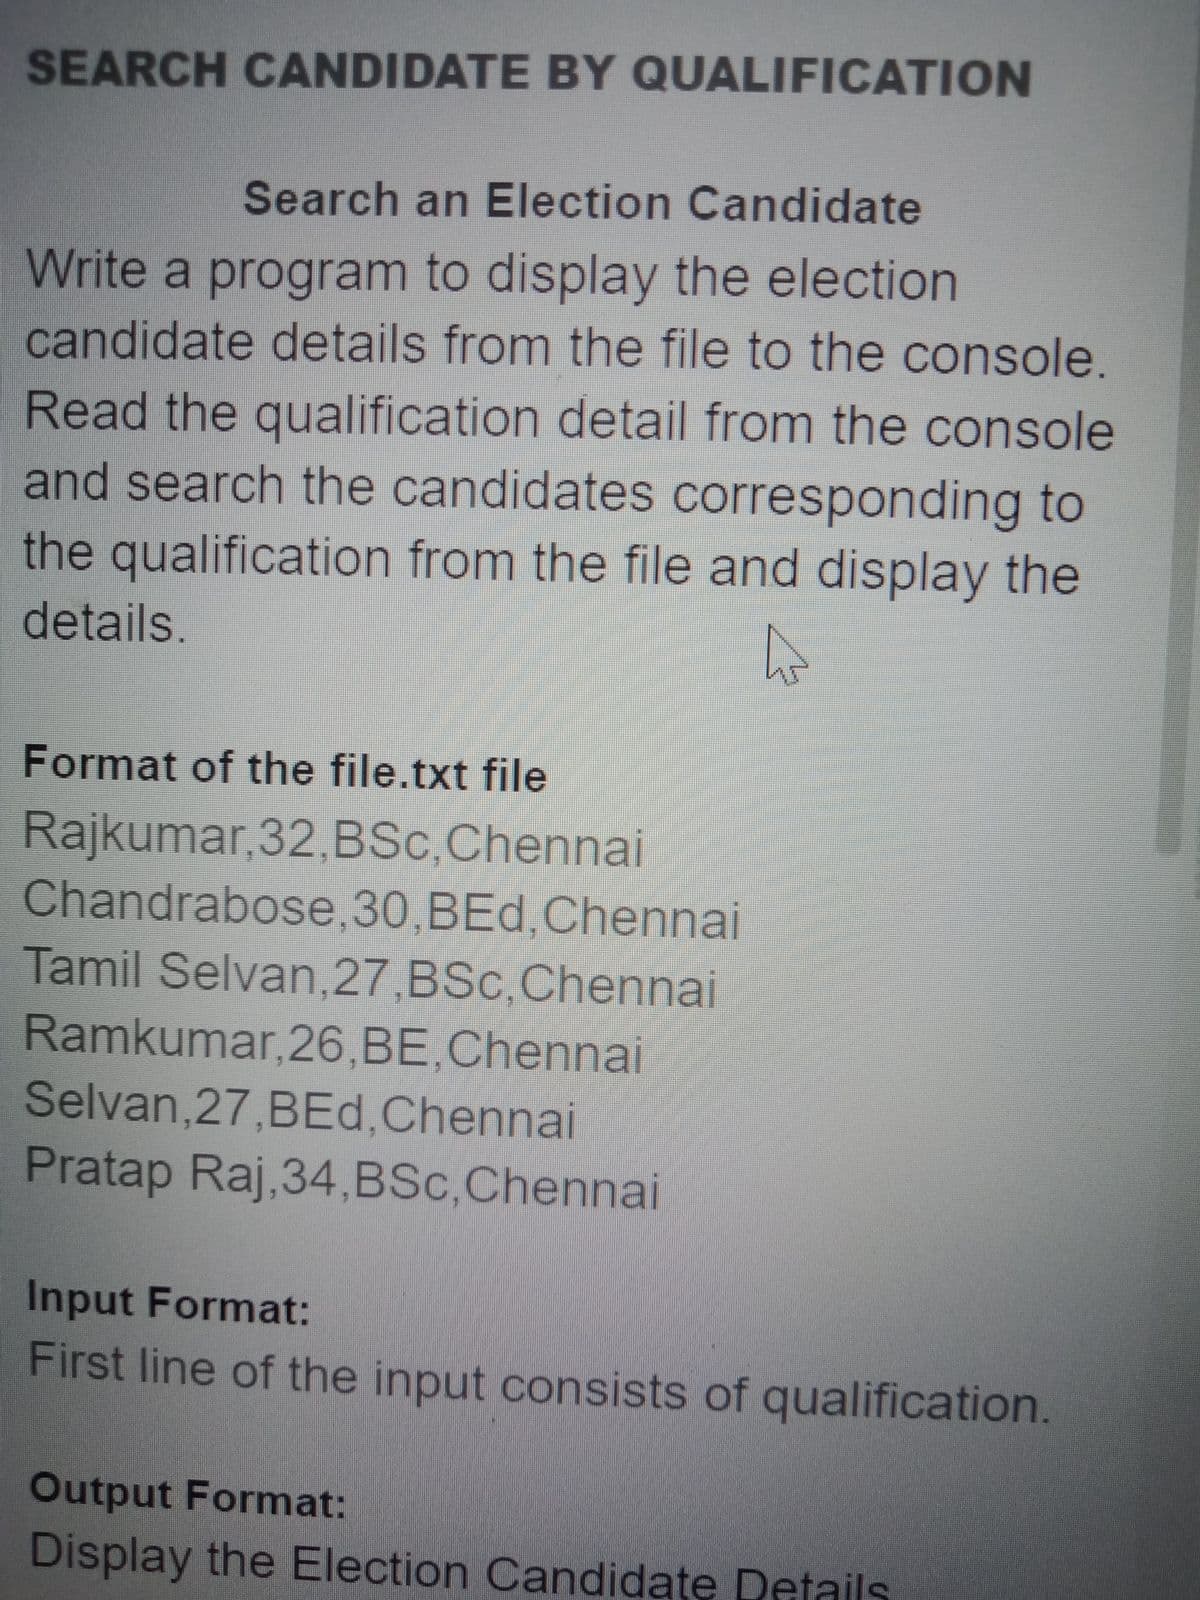 SEARCH CANDIDATE BY QUALIFICATION
Search an Election Candidate
Write a program to display the election
candidate details from the file to the console.
Read the qualification detail from the console
and search the candidates corresponding to
the qualification from the file and display the
details.
Format of the file.txt file
Rajkumar,32,BSc,Chennai
Chandrabose,30,BEd,Chennai
Tamil Selvan,27,BSc,Chennai
Ramkumar, 26,BE,Chennai
Selvan,27,BEd,Chennai
Pratap Raj,34,BSc,Chennai
Input Format:
First line of the input consists of qualification.
Output Format:
Display the Election Candidate Details
